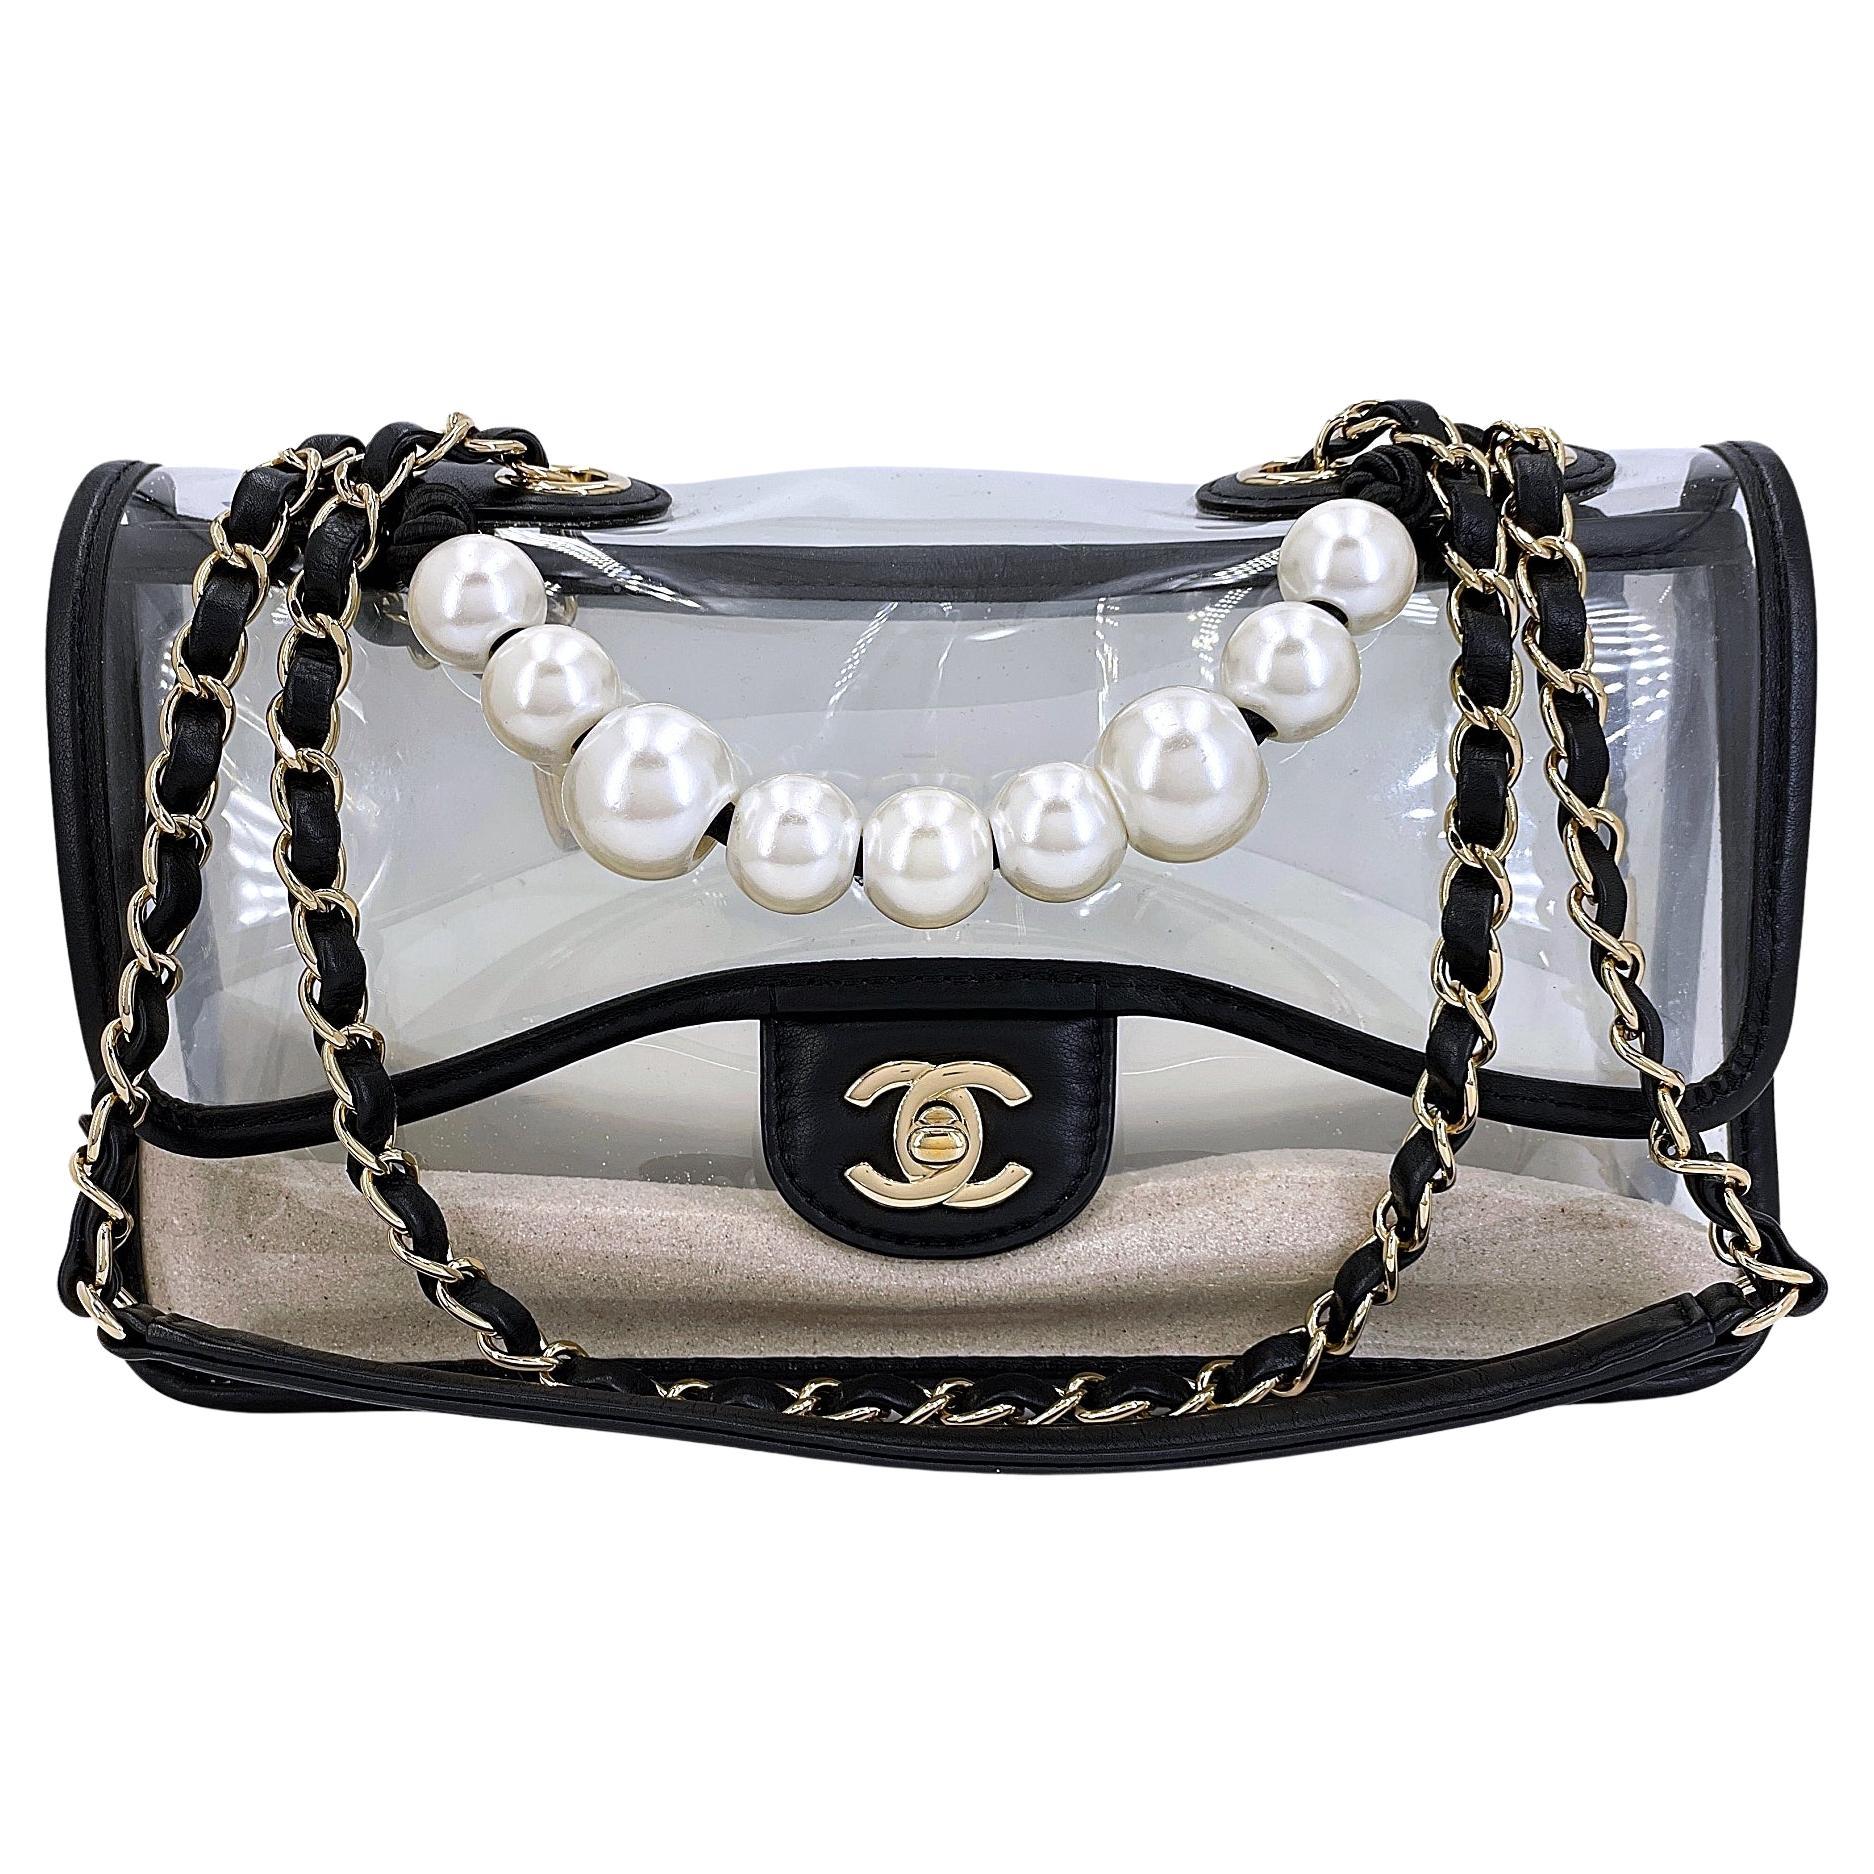 Sac à rabat Chanel Sand by the Sea Pearl and PVC 67873 en vente